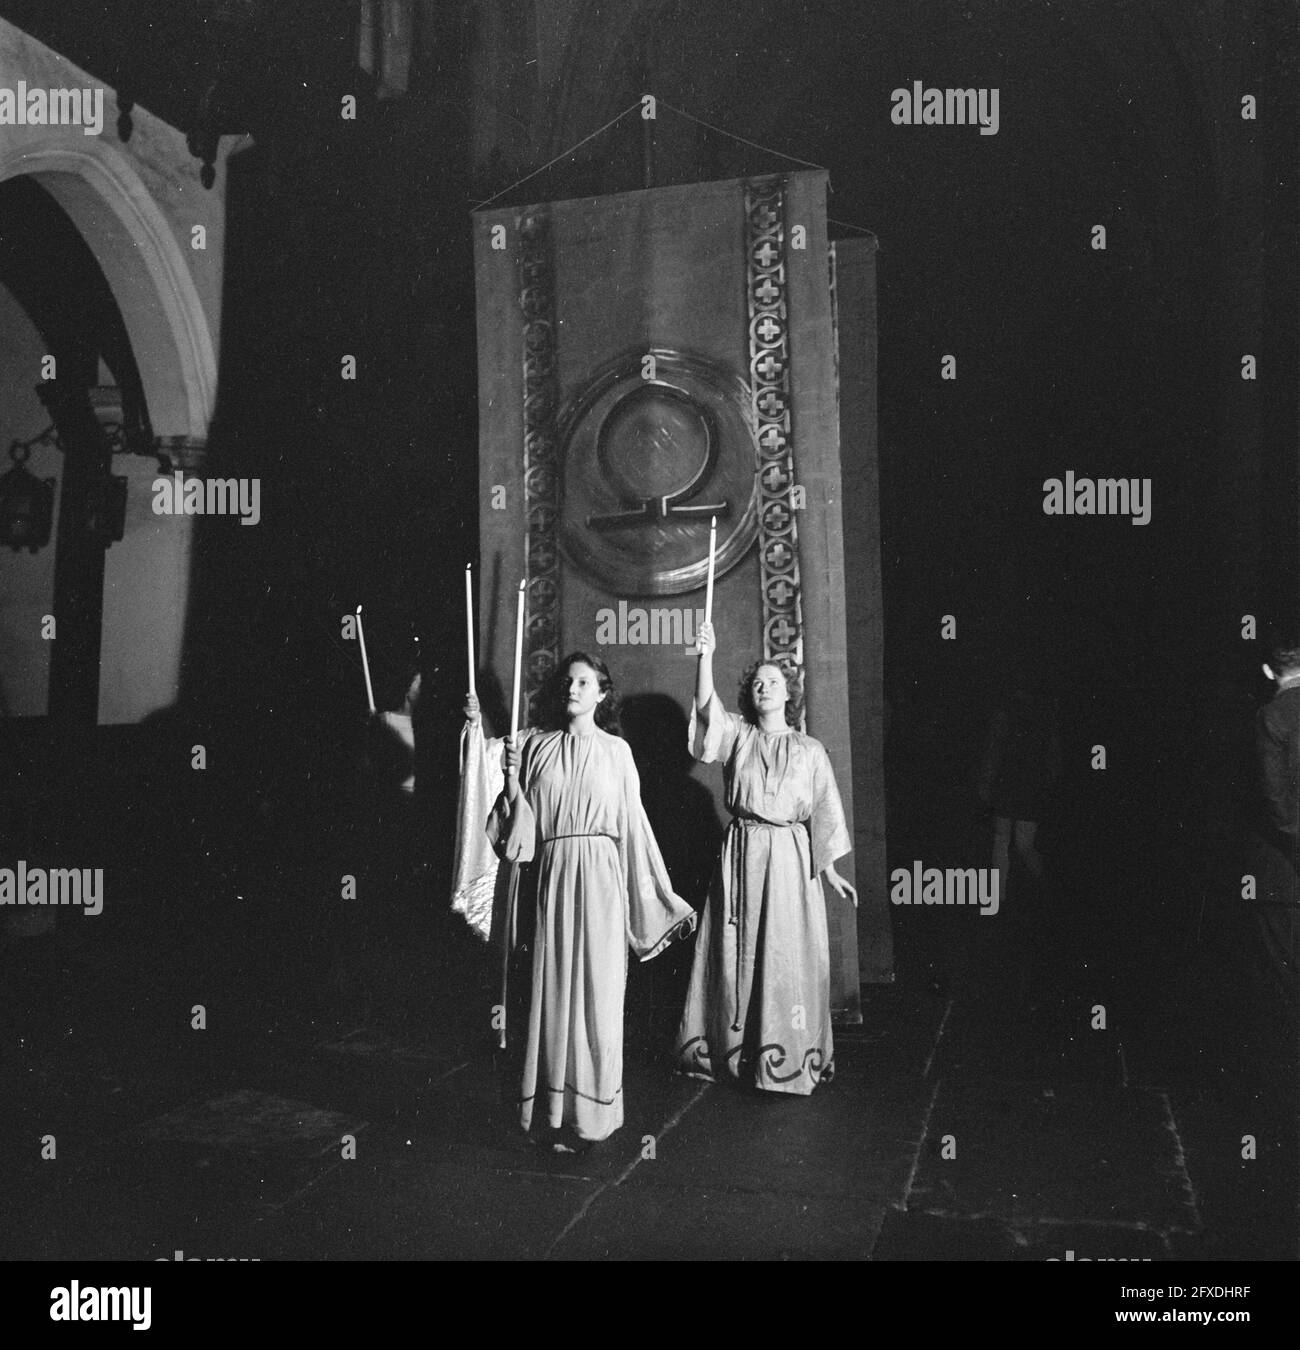 St. Bavo church Christmas play, December 21, 1945, CHRIST PLAY, The Netherlands, 20th century press agency photo, news to remember, documentary, historic photography 1945-1990, visual stories, human history of the Twentieth Century, capturing moments in time Stock Photo